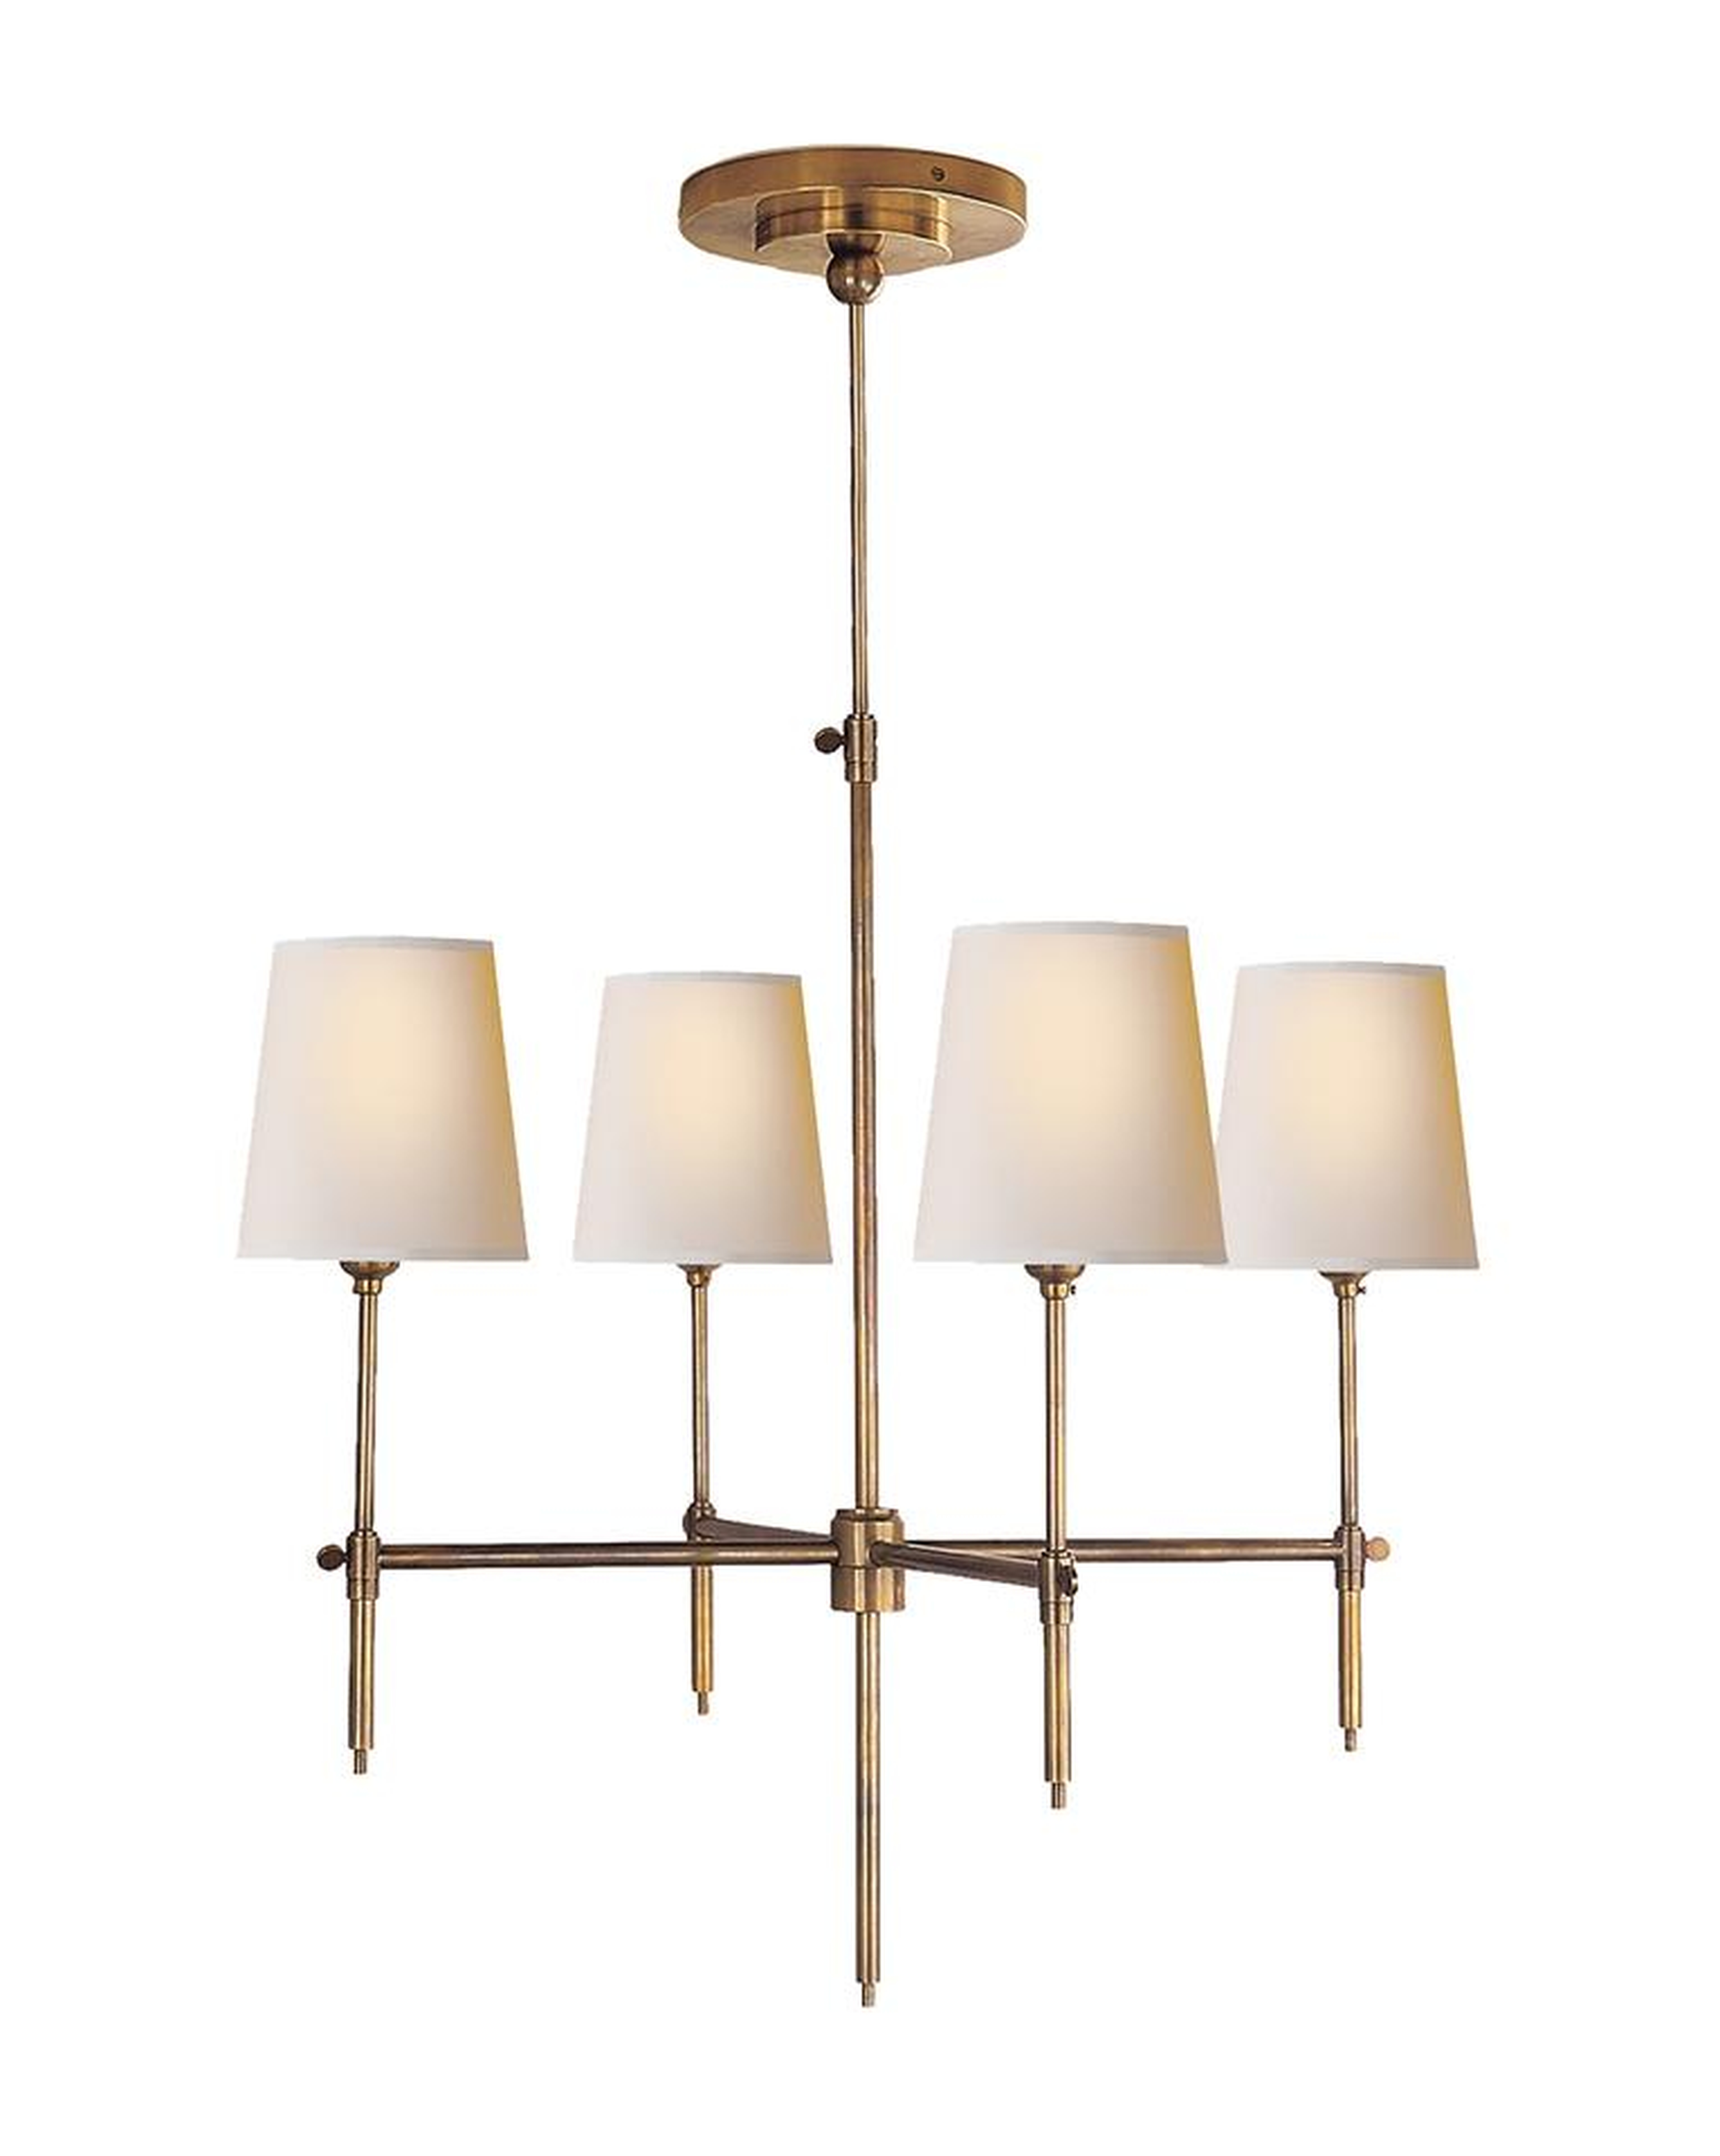 BRYANT SMALL CHANDELIER - HAND-RUBBED ANTIQUE BRASS - McGee & Co.